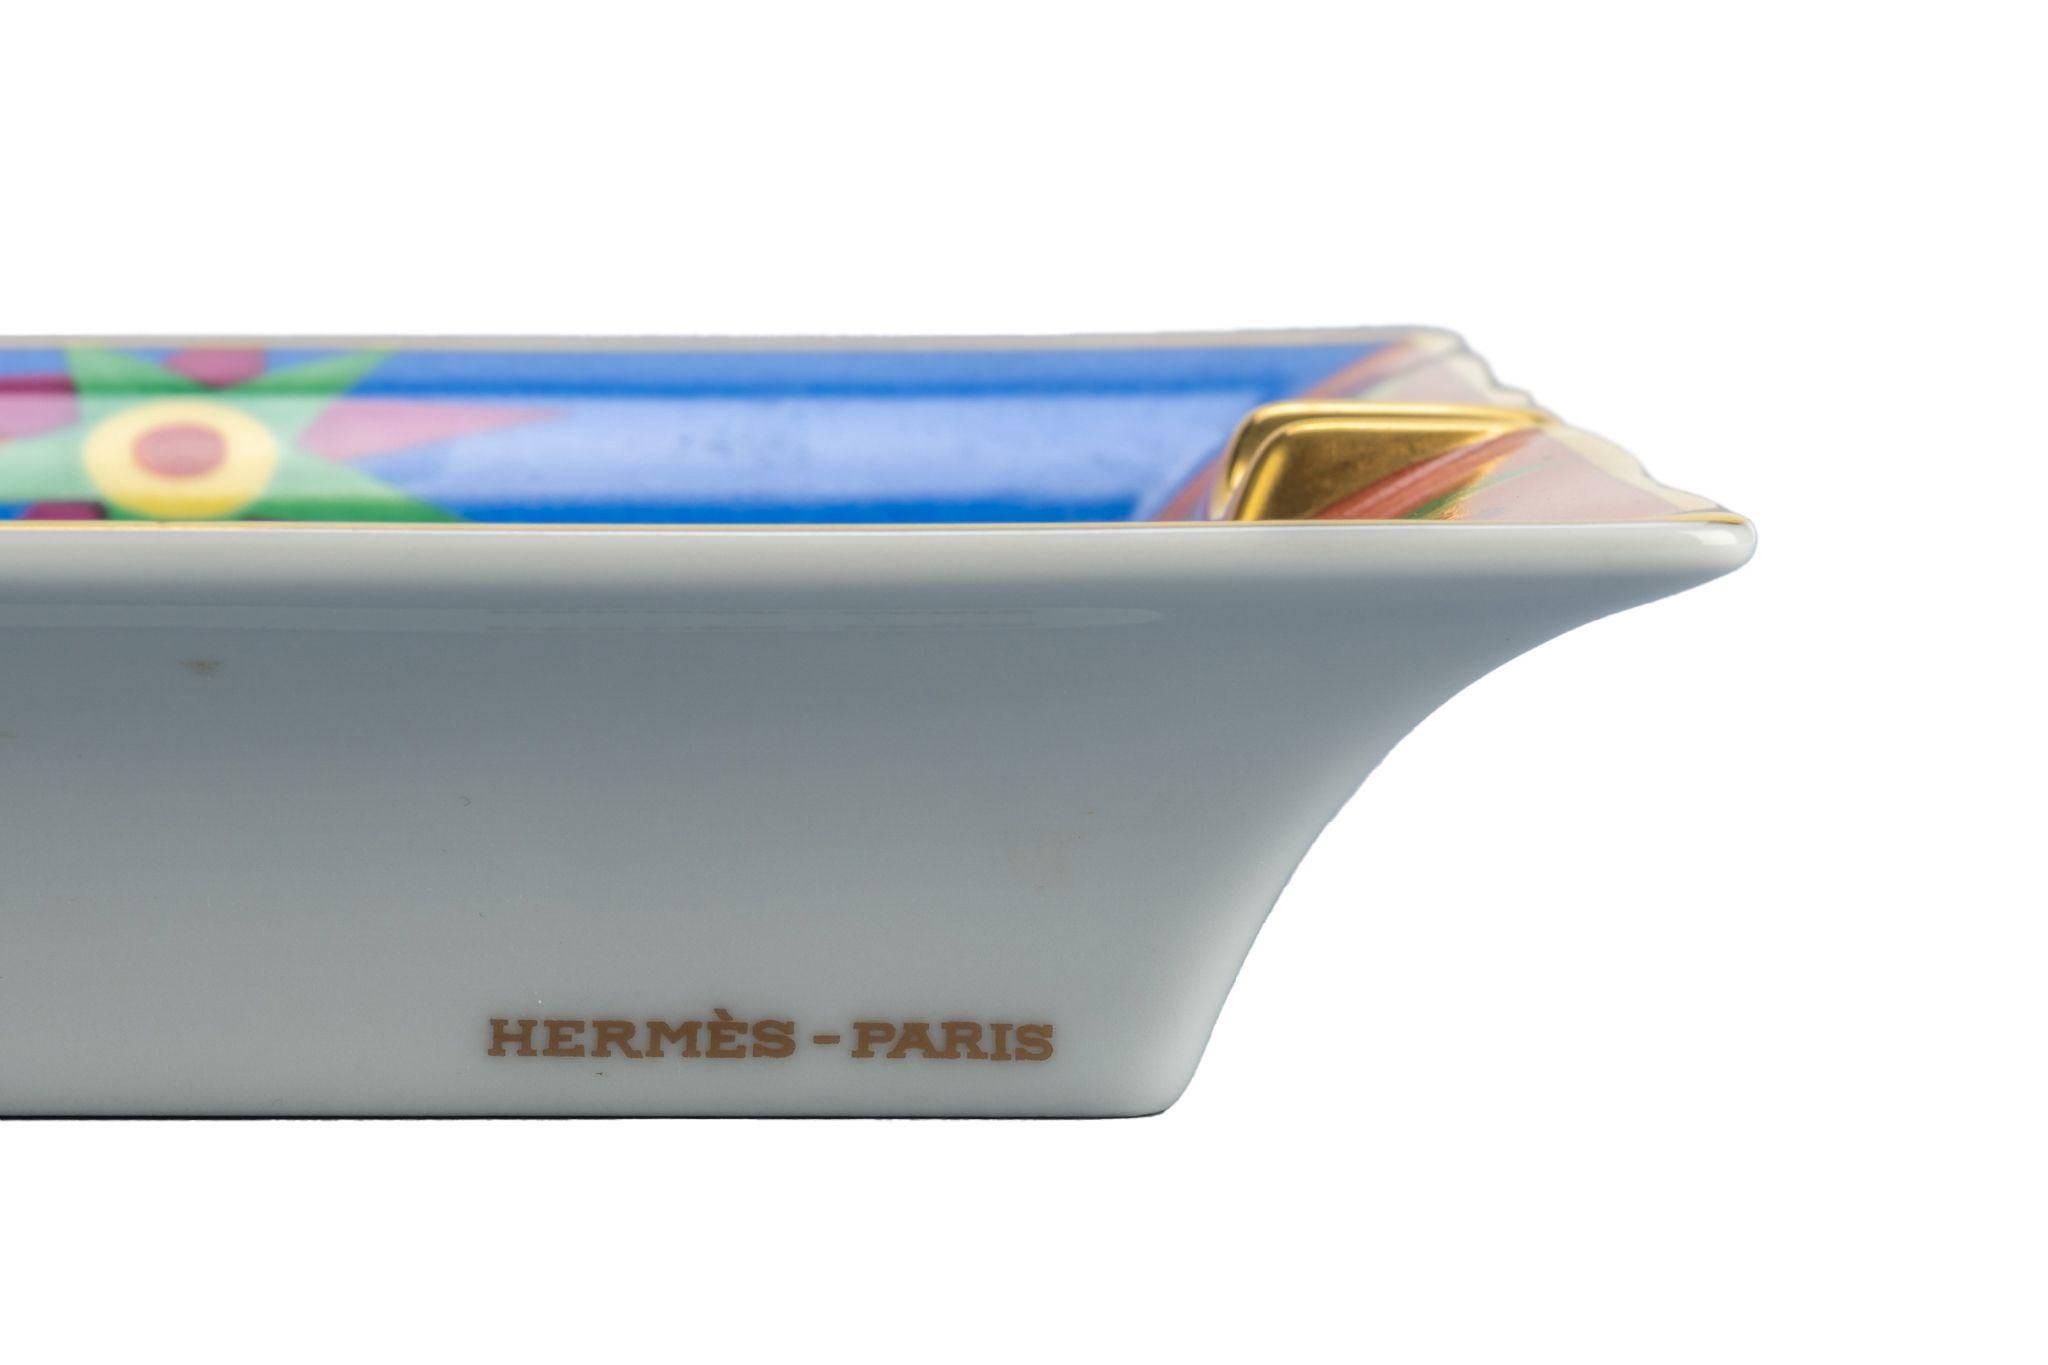 Hermes Jungle Porcelain Ashtray In Excellent Condition For Sale In West Hollywood, CA